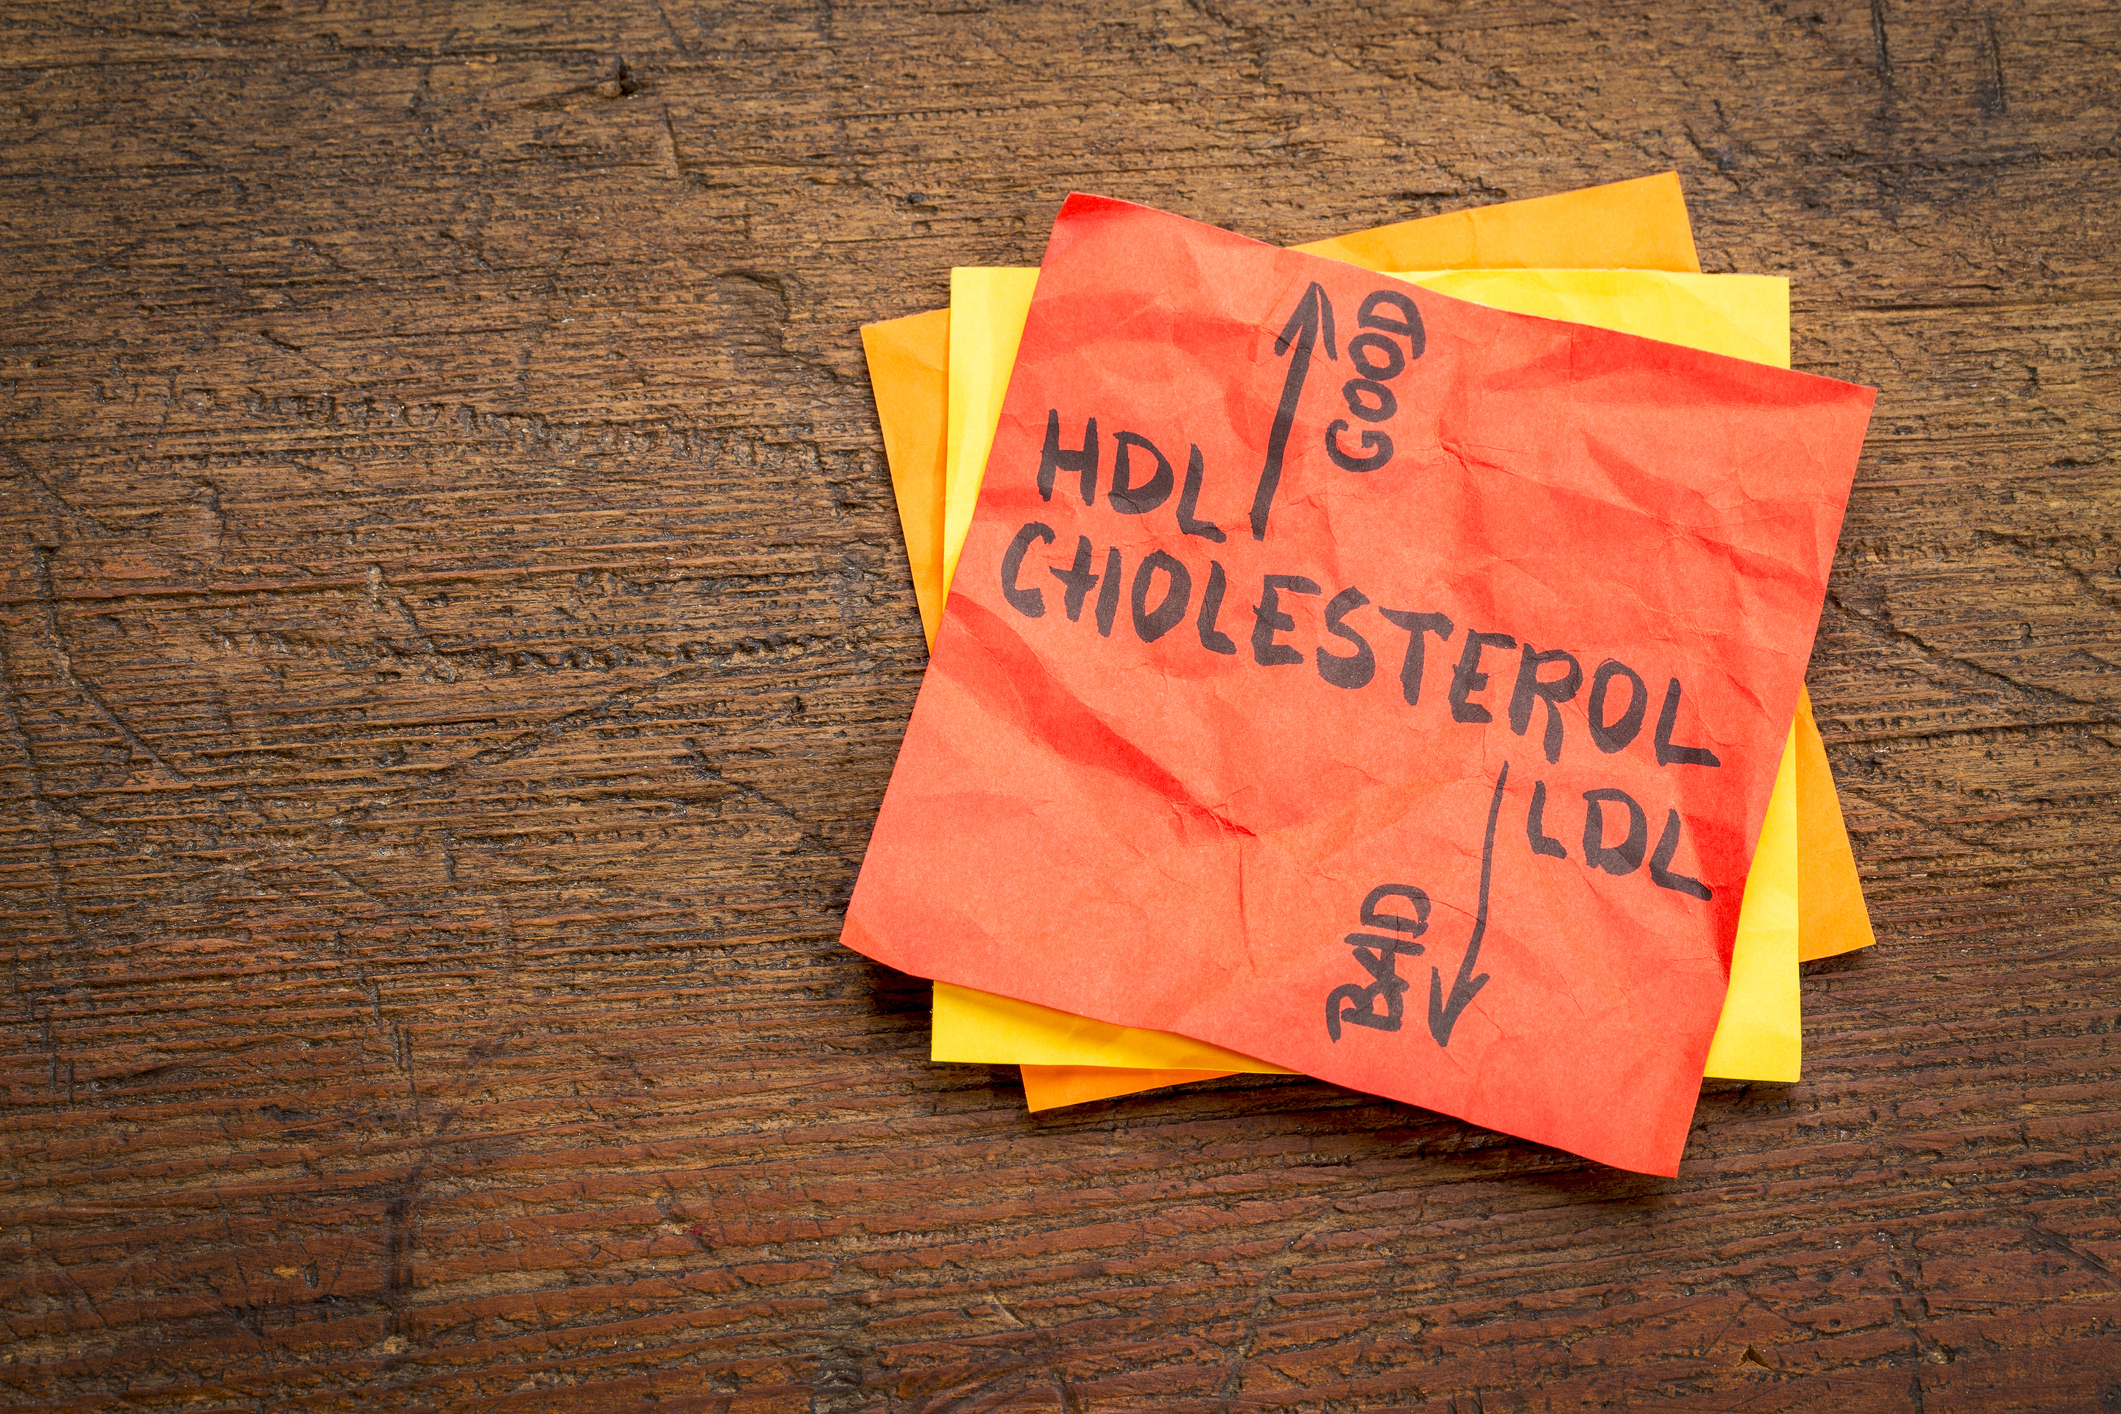 ‘Good’ cholesterol’s role as heart health predictor challenged